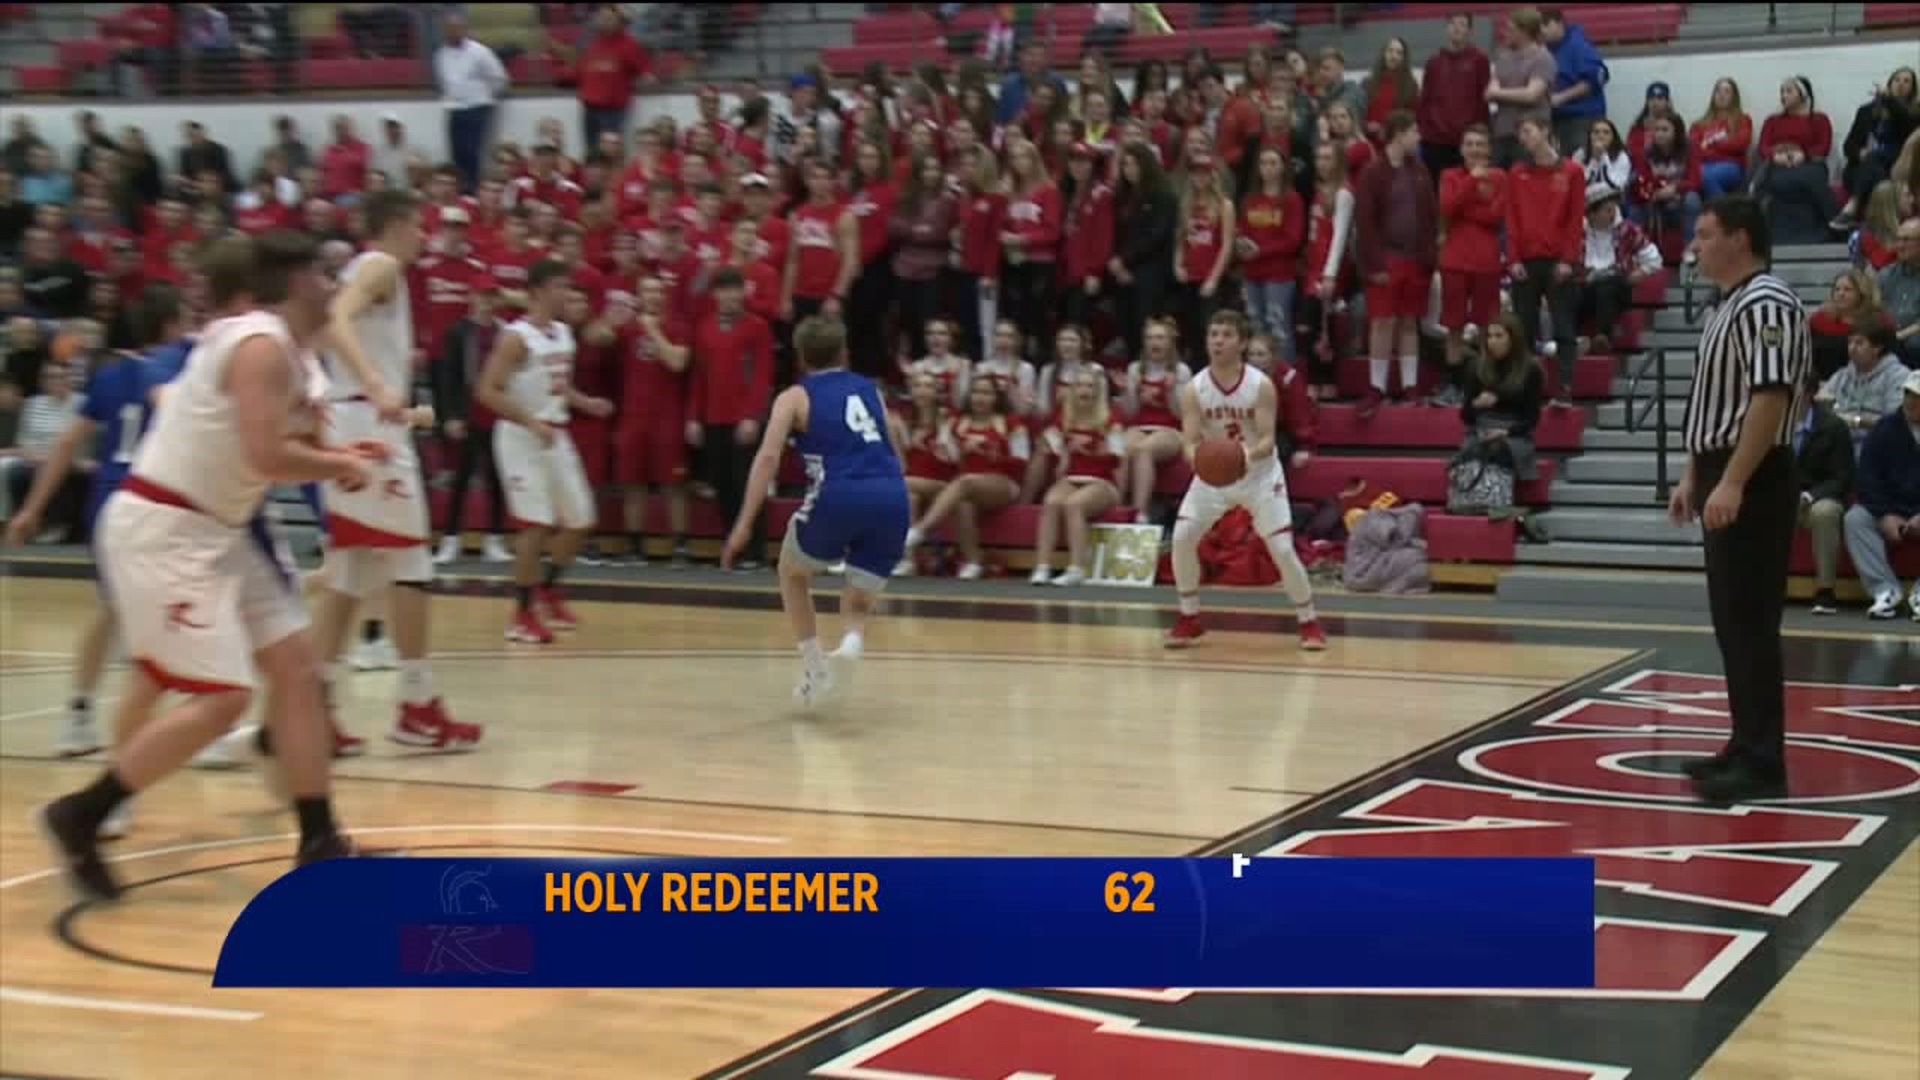 Holy Redeemer vs Mid Valley bb